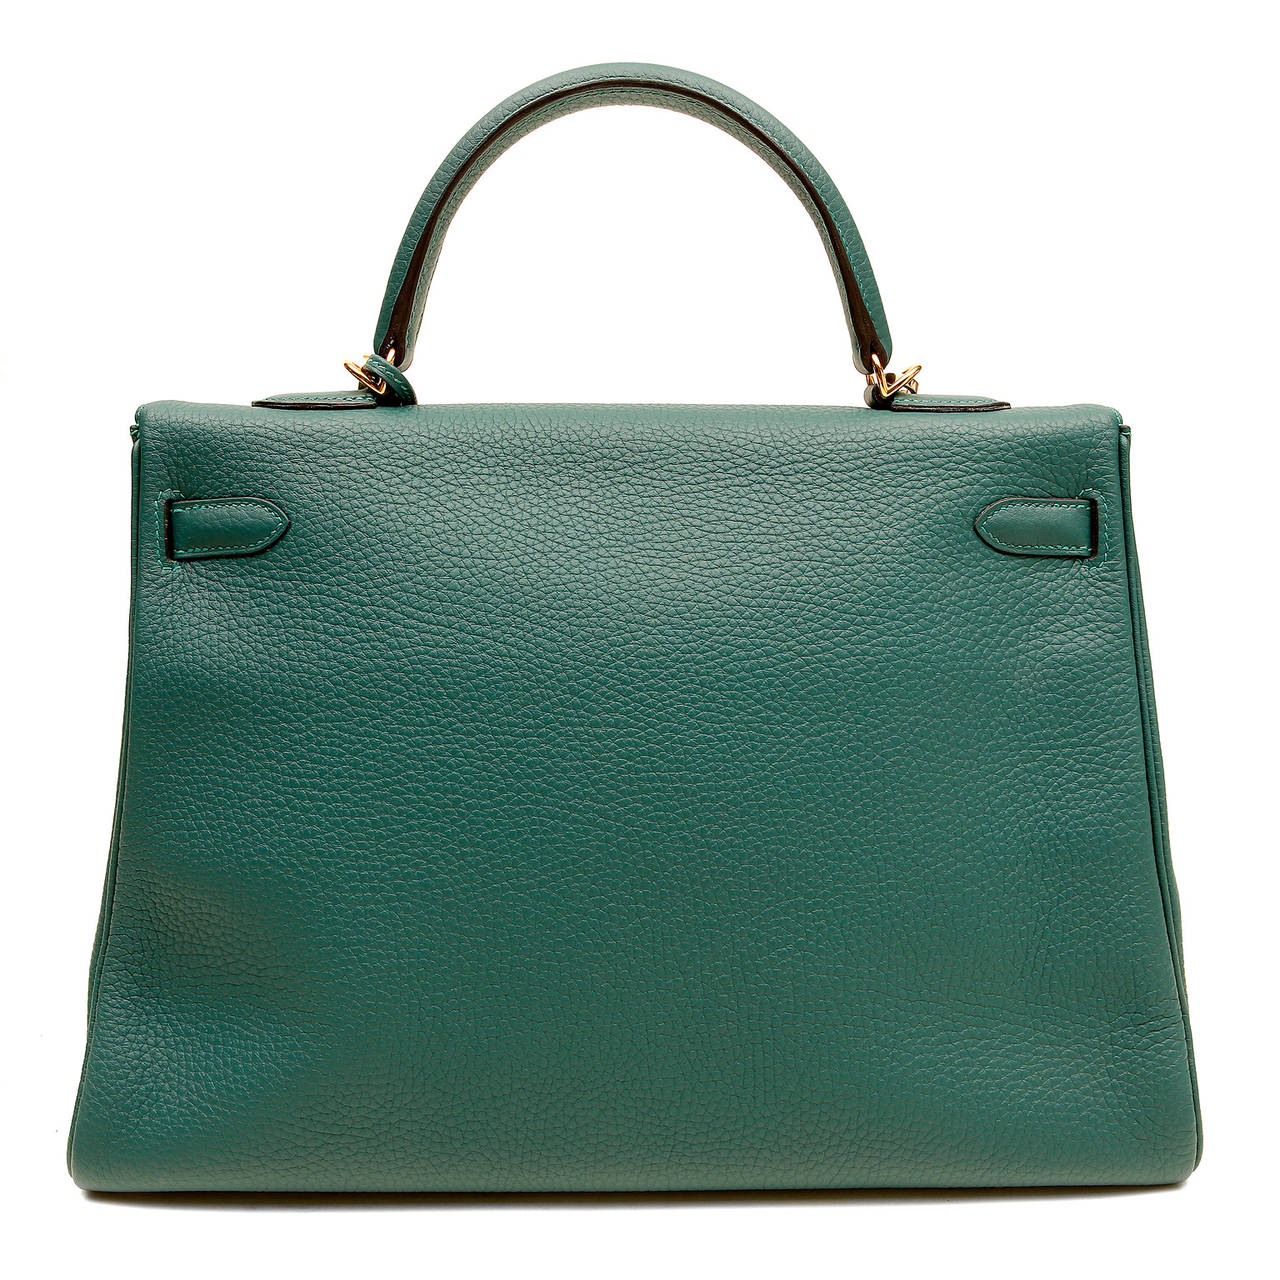 Hermès Malachite Togo 35 cm Kelly-  PRISTINE
 Never before Carried with the protective plastic still intact on the closure hardware
  Hermès bags are considered the ultimate luxury item worldwide.  Each piece is handcrafted with waitlists that